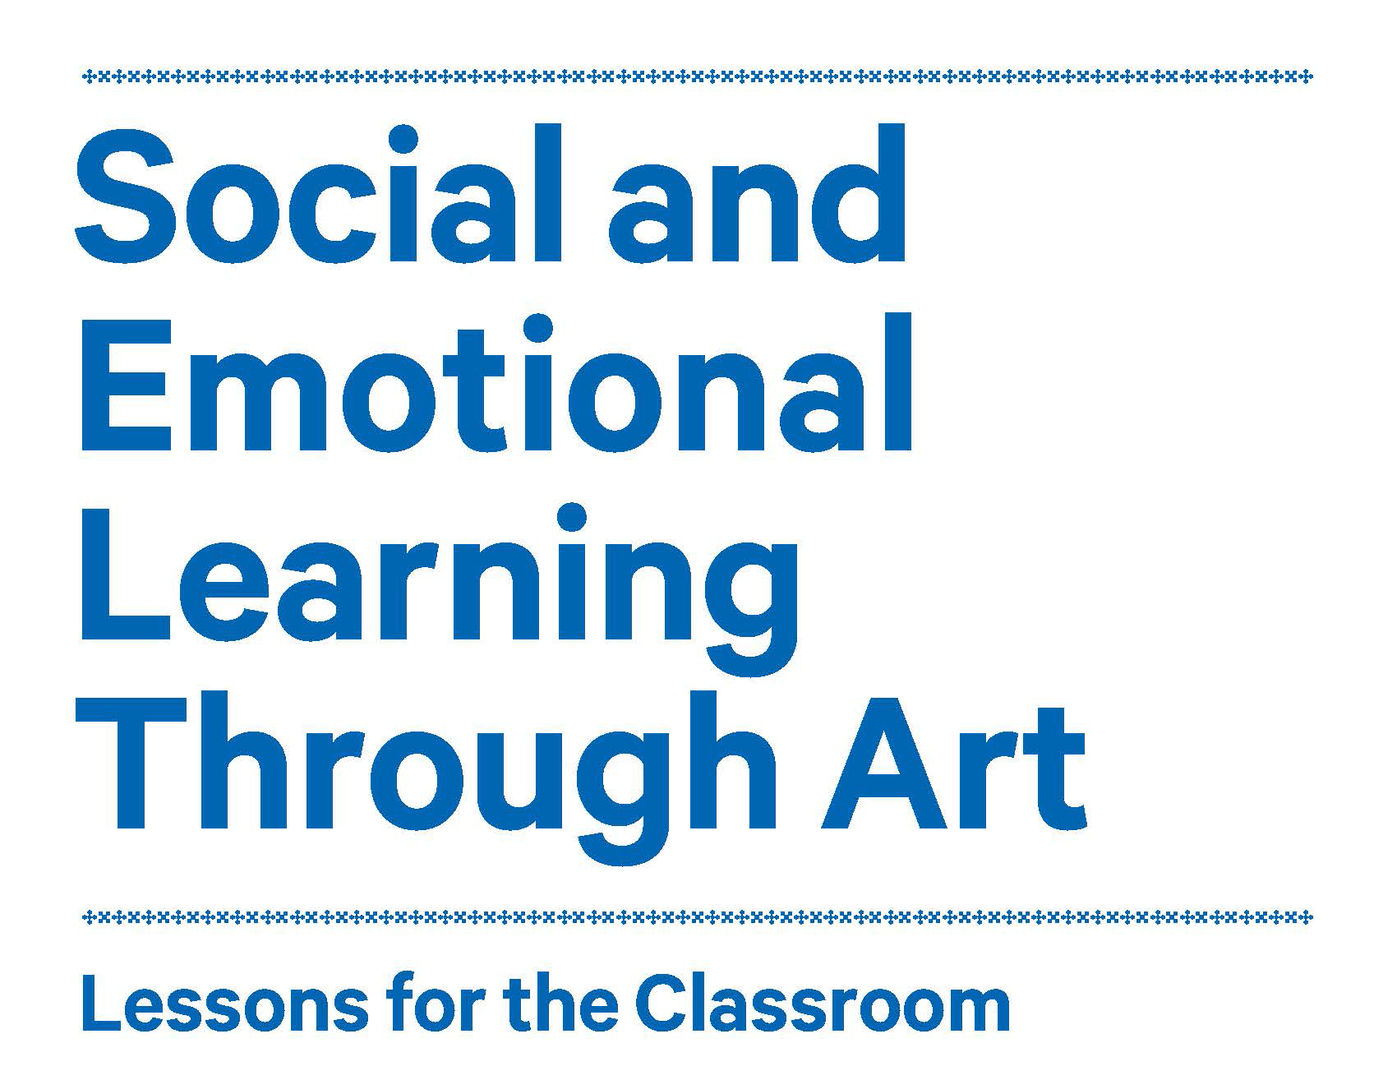 Blue text on white background that reads "Social and Emotional Learning Through Art: Lessons for the Classroom"